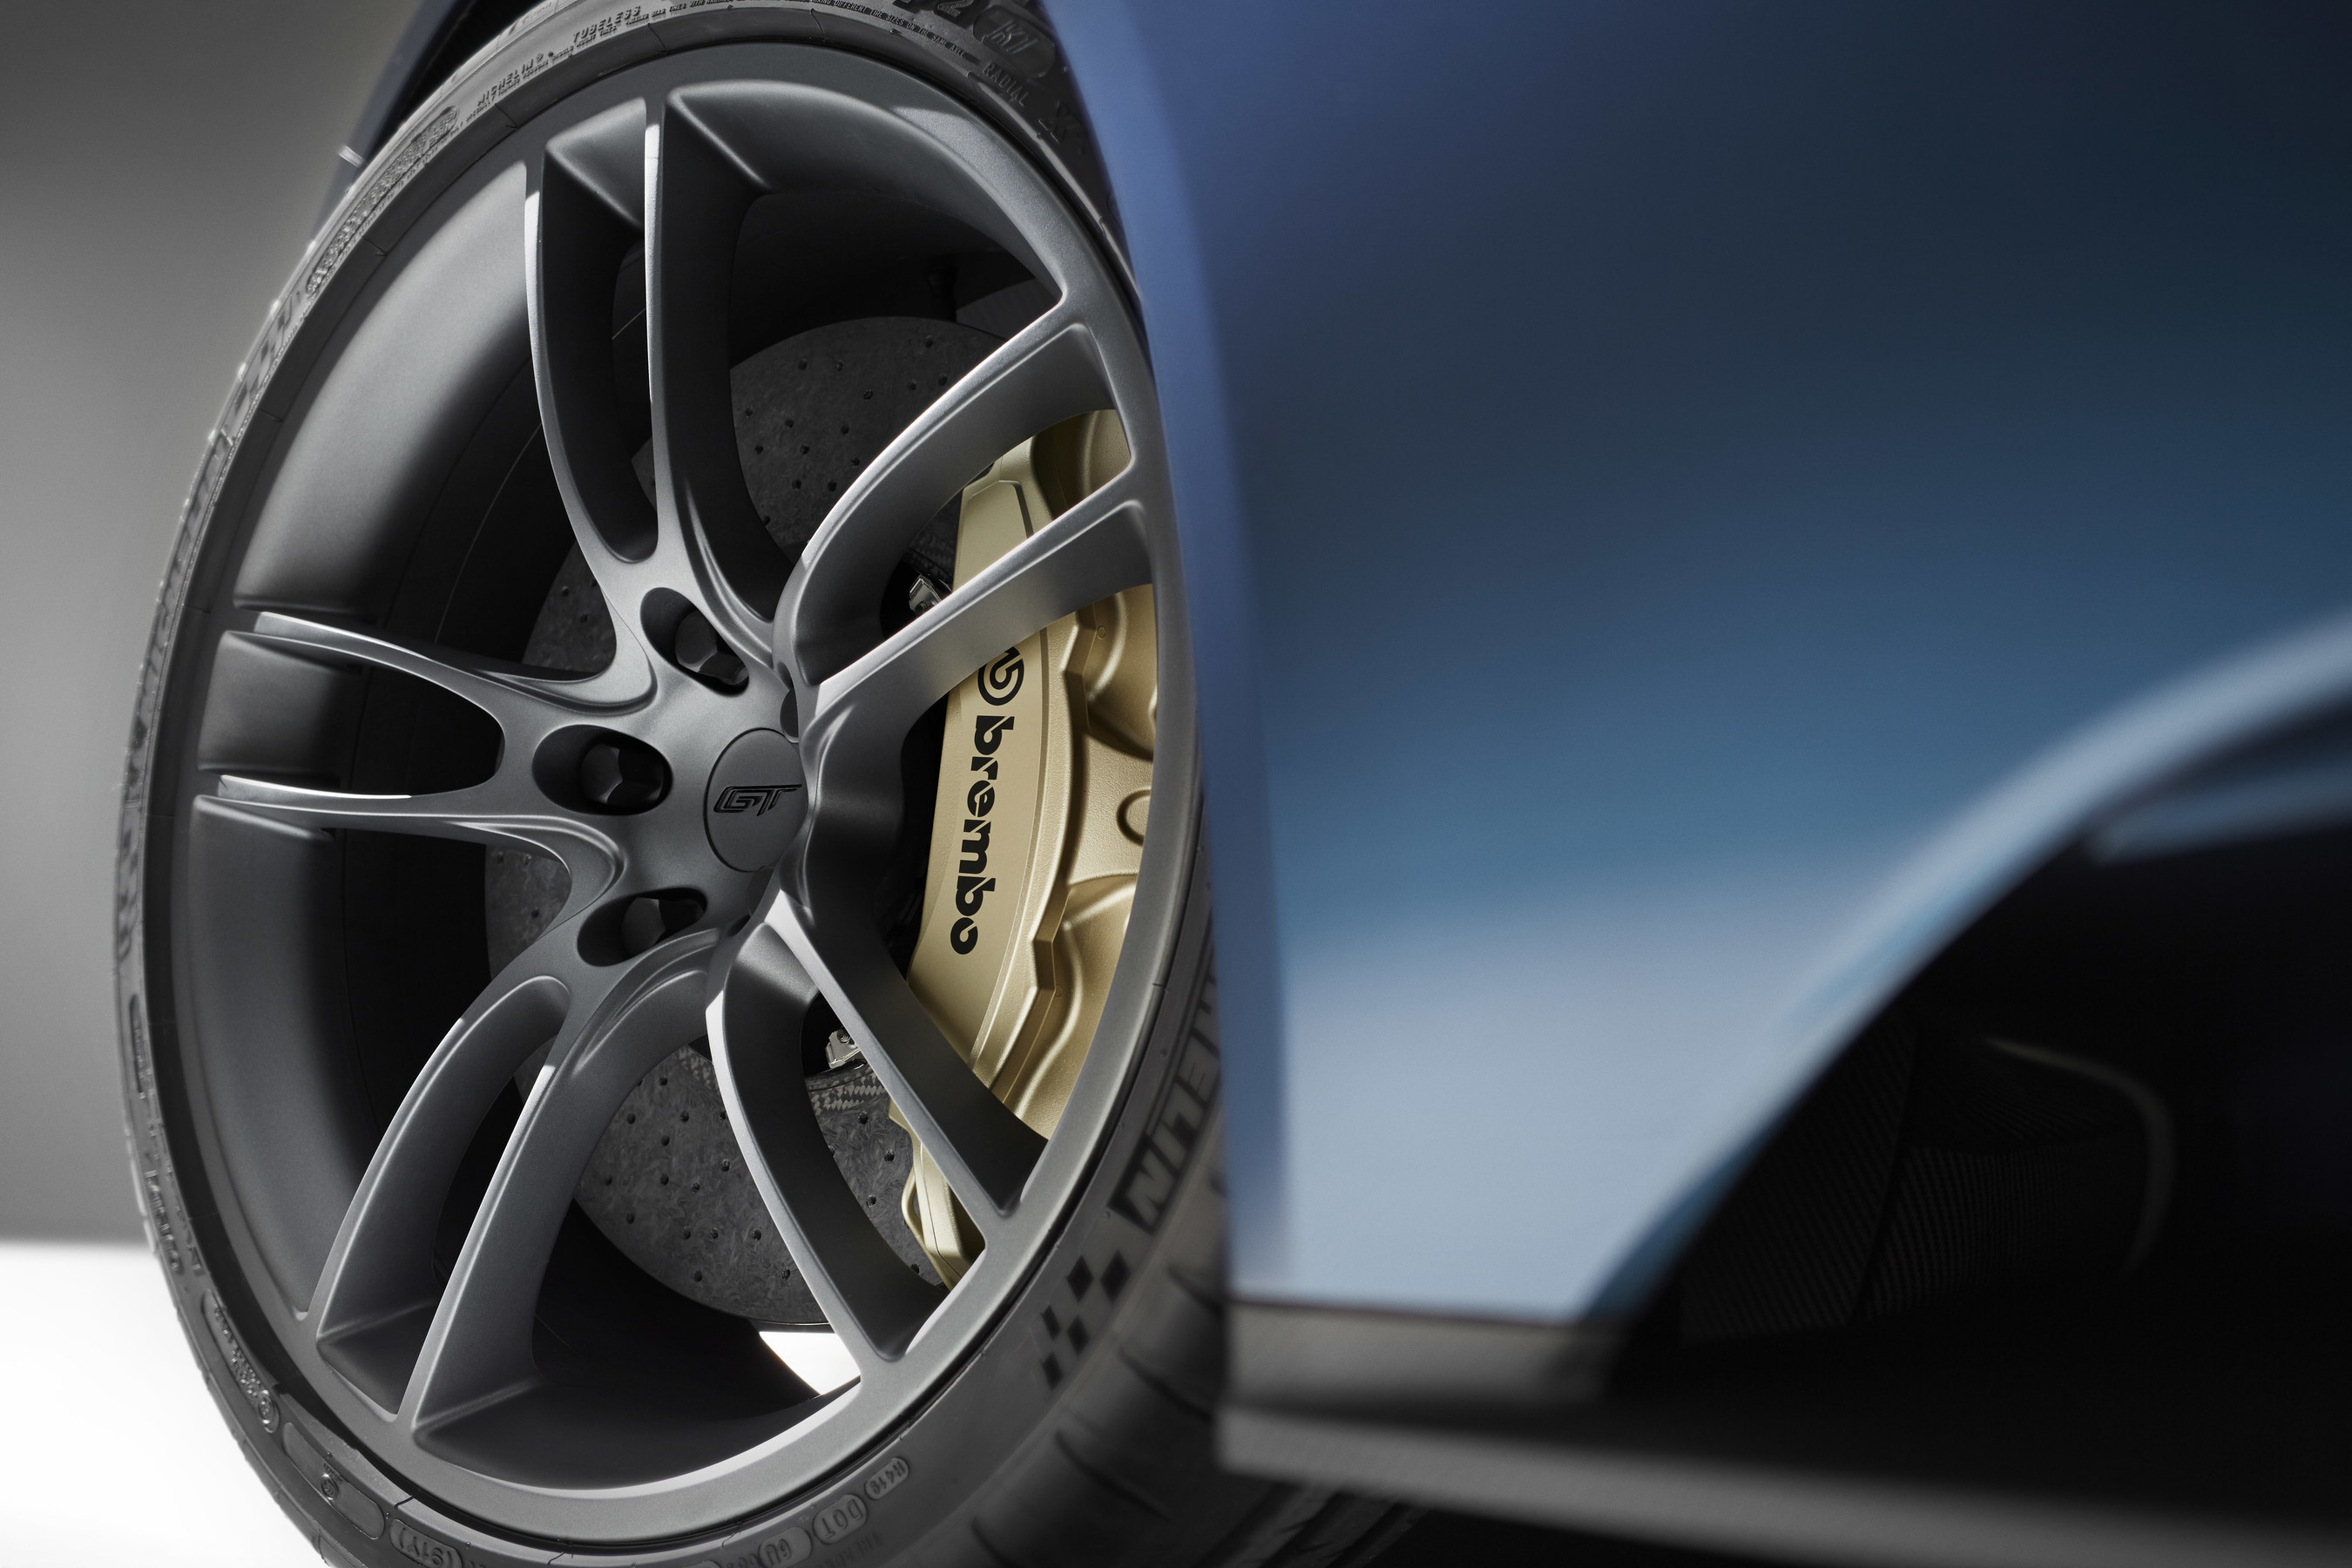 The all-new Ford GT supercar comes with Michelin Pilot Super Sport Cup 2 tires